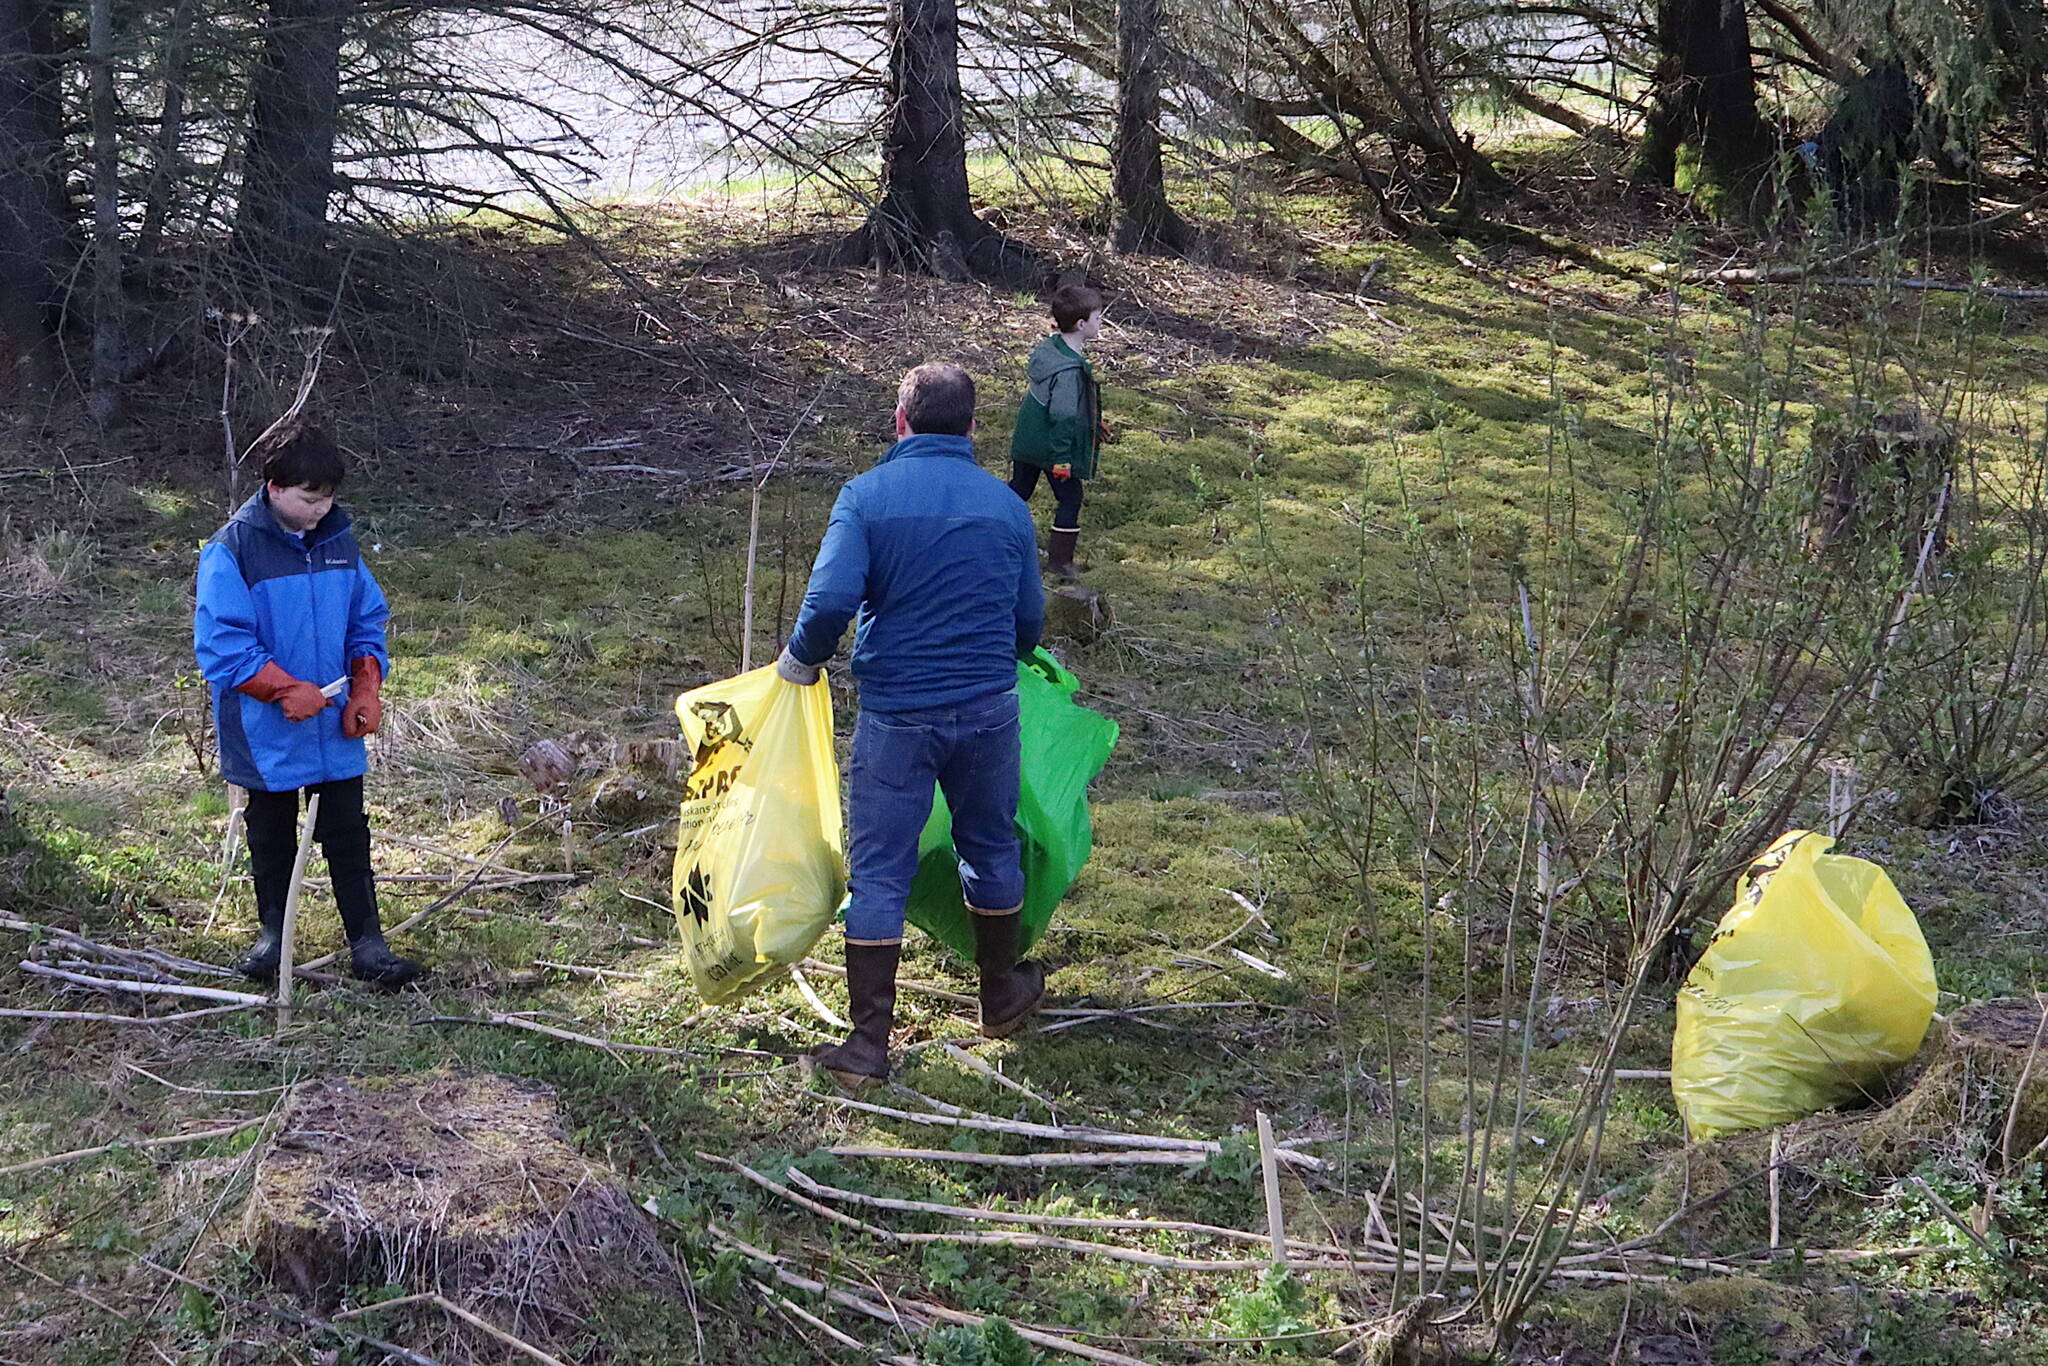 Nils Andreassen and his sons Amos, 7, and Axel, 11, pick up trash in the Lemon Creek area during the annual Litter Free community cleanup on Saturday morning. (Mark Sabbatini / Juneau Empire)